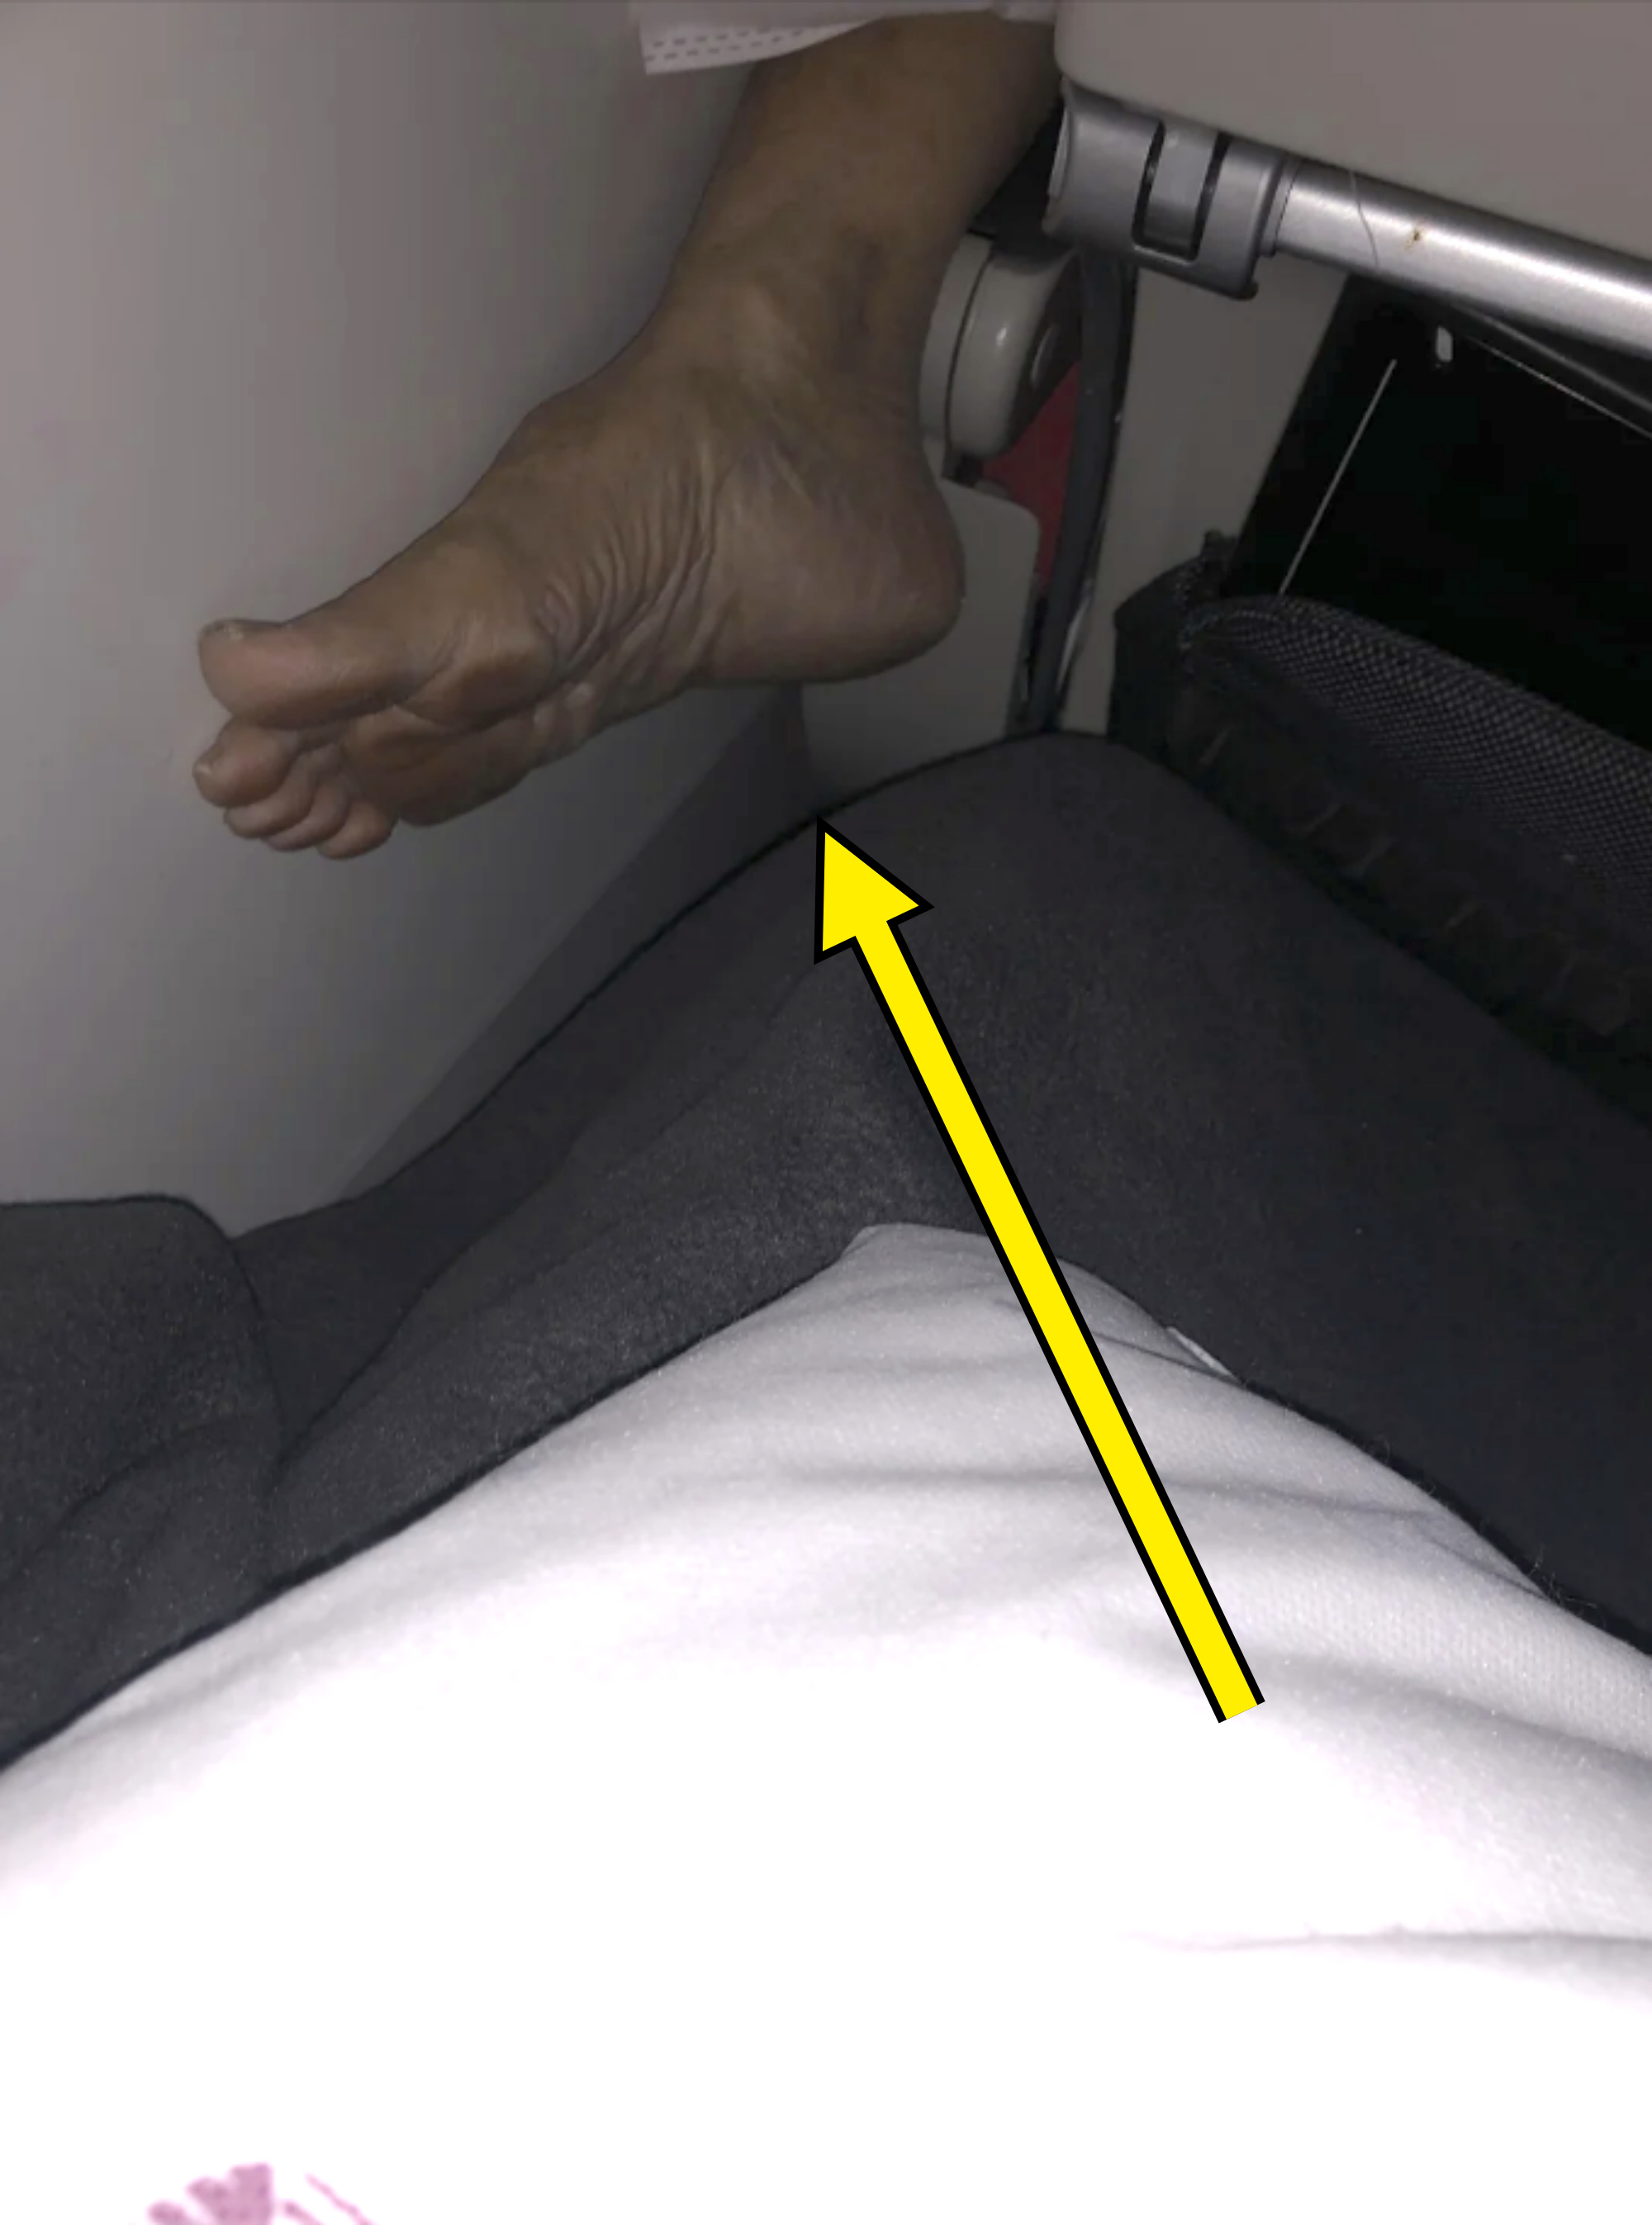 person&#x27;s dirty bare foot in someone&#x27;s space